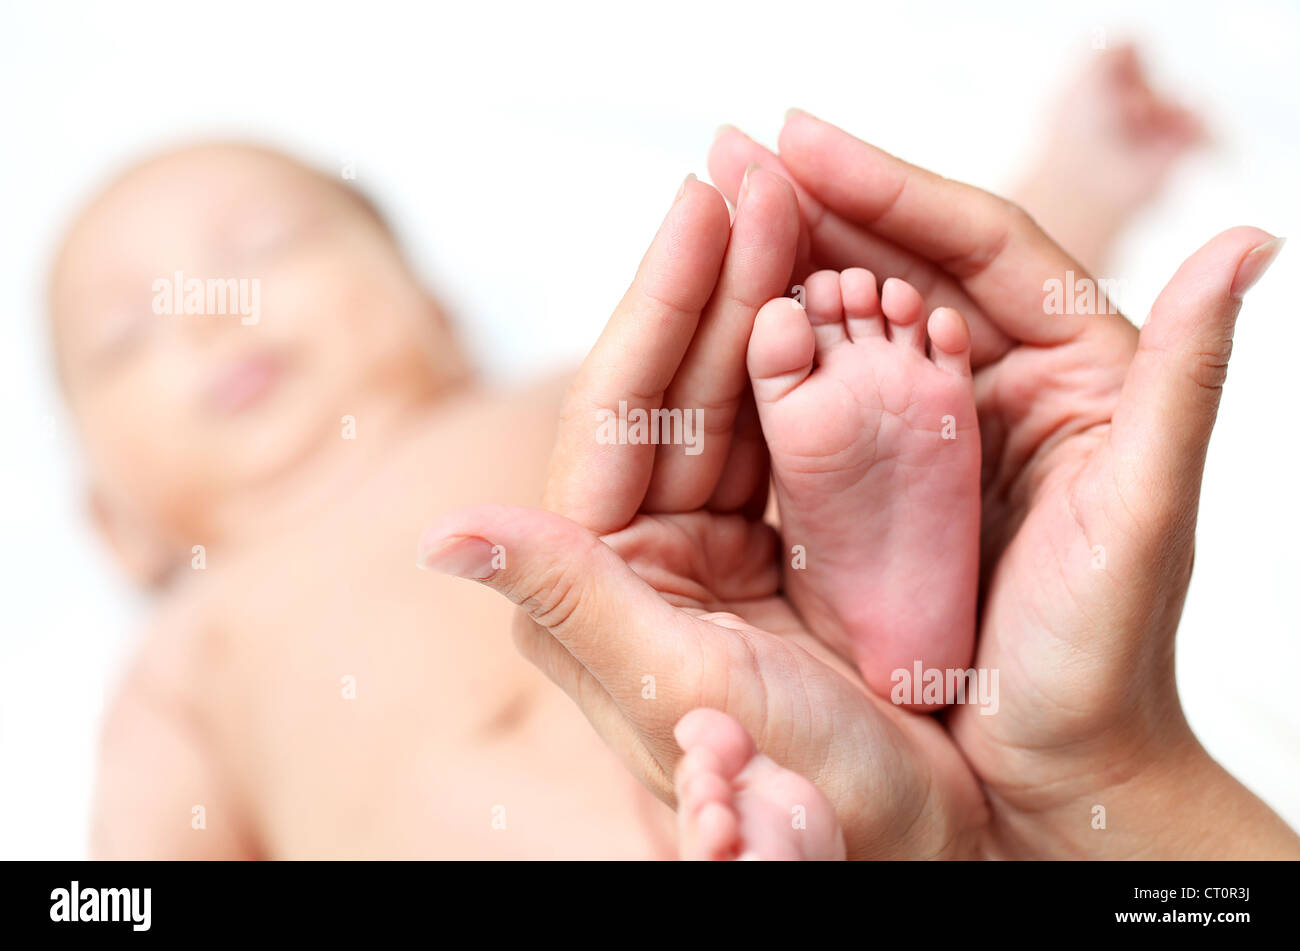 Clouse-up of newborn baby's foot in mammy's hands Stock Photo